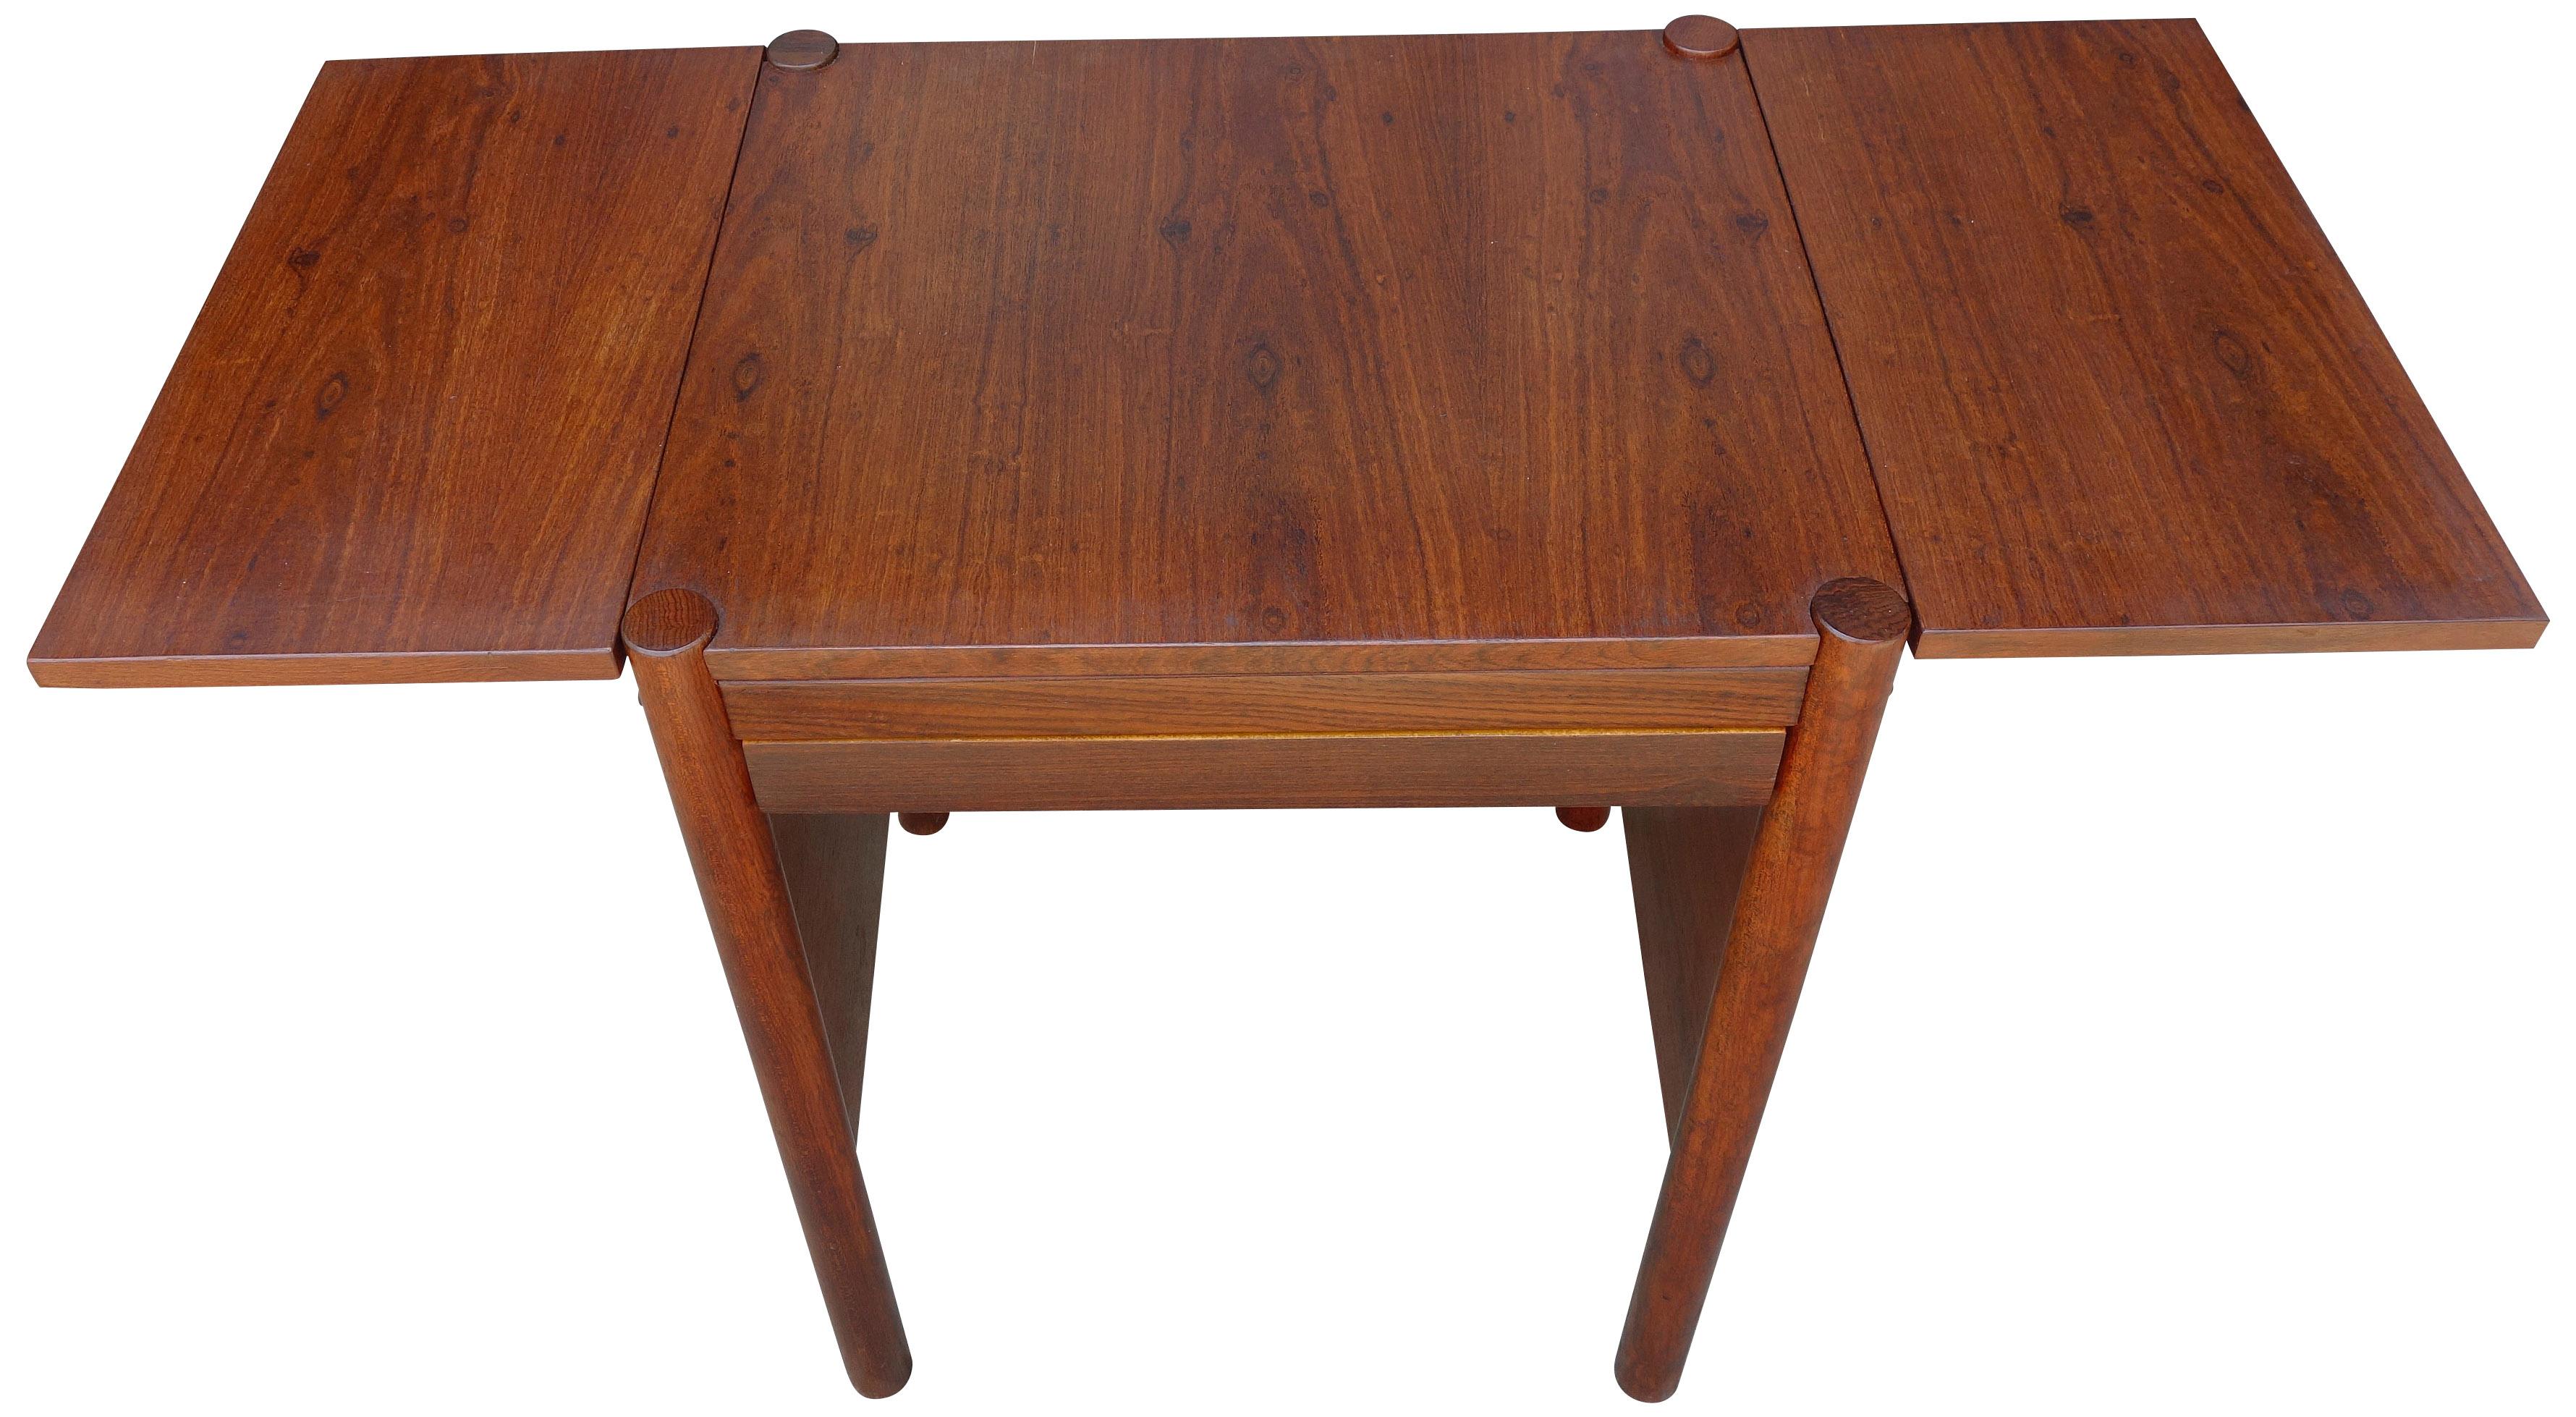 For your consideration is this fantastic side table or entry way table, or even a small desk by Jean Gillon made of native hardwood Jangada (a type of Bolivian rosewood). Featuring a pullout / pull-out drawer and two drop leaves. Each leaf measuring